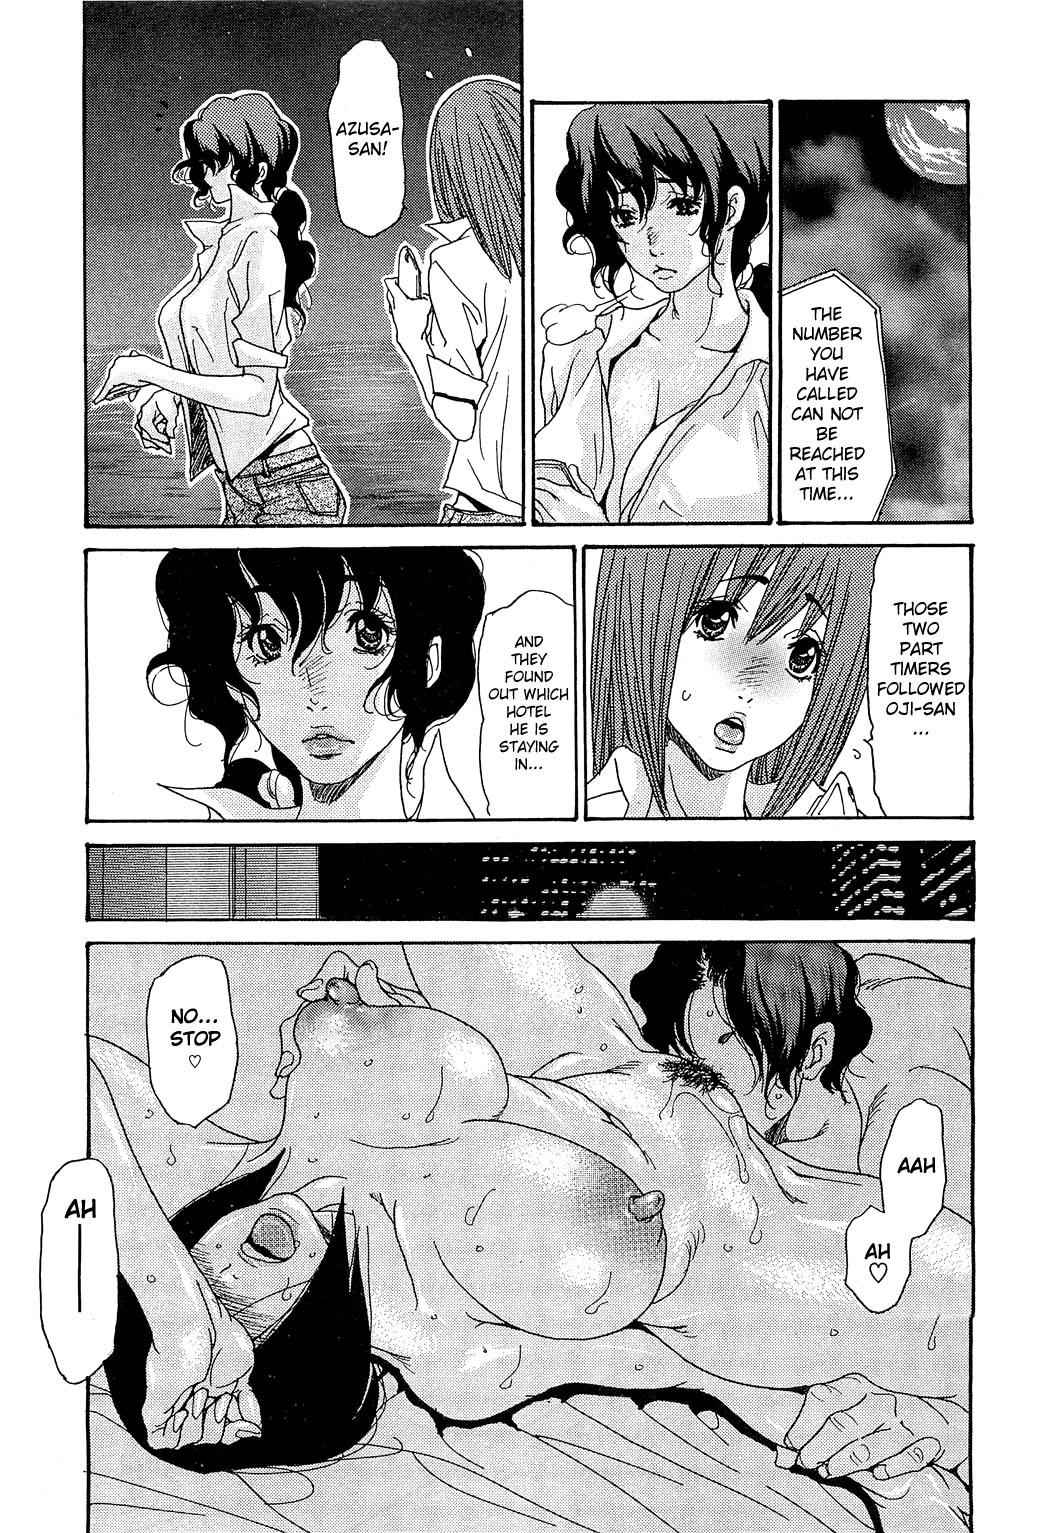 [Aoi Hitori] Umi no Yeah!! 2013 ~The Peaceful Married Couple's Hair Trigger Crisis~ Ch.1 [English][aceonetwo] 12